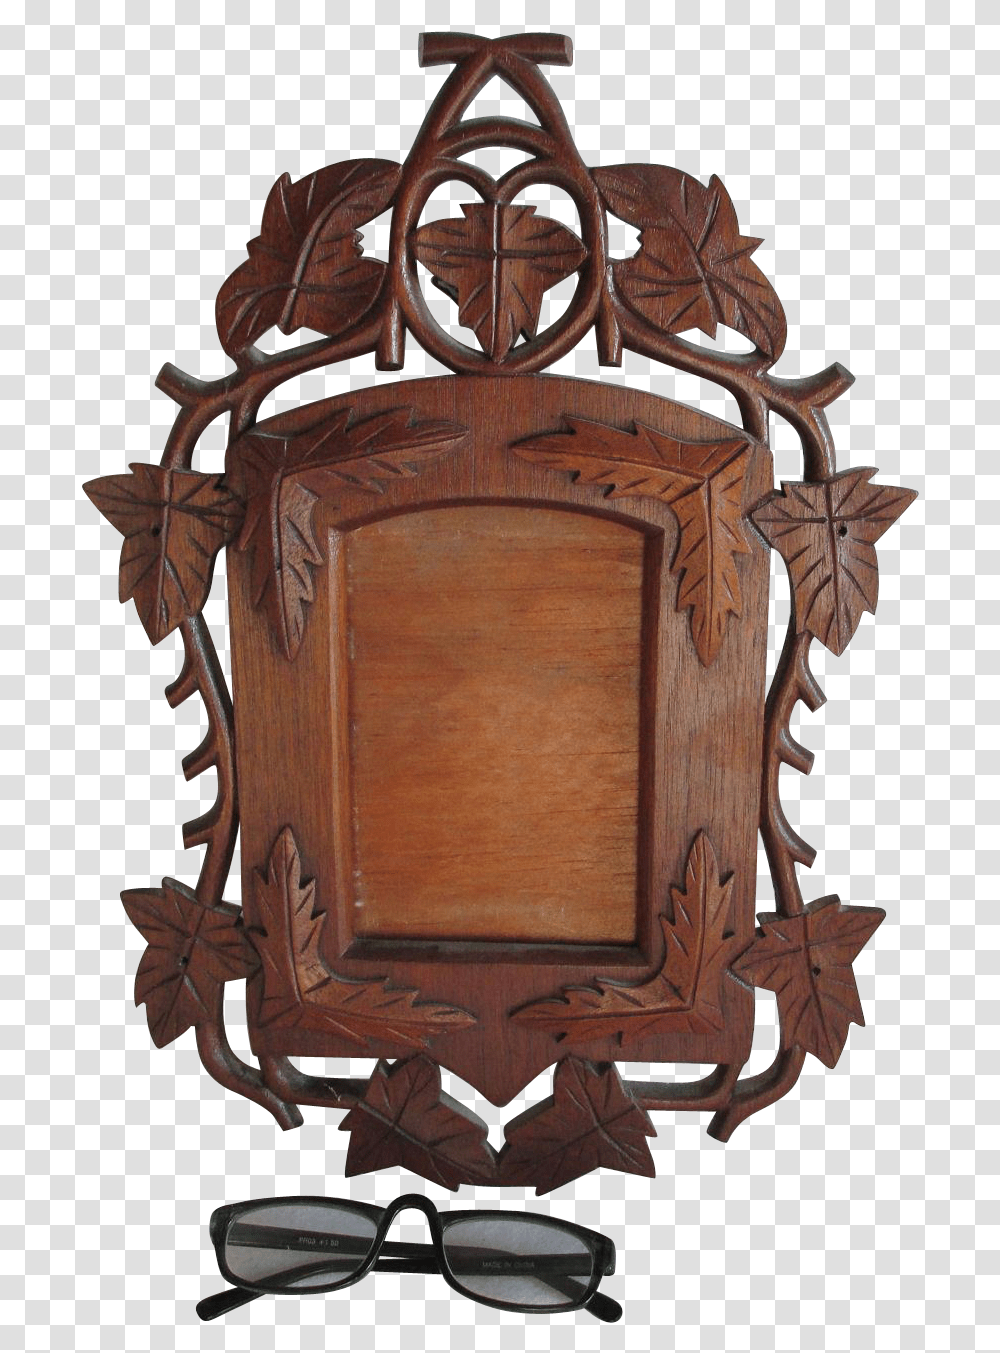 Antique Hand Carved Folk Art Picture Frame Wood, Furniture, Tabletop, Sunglasses, Accessories Transparent Png